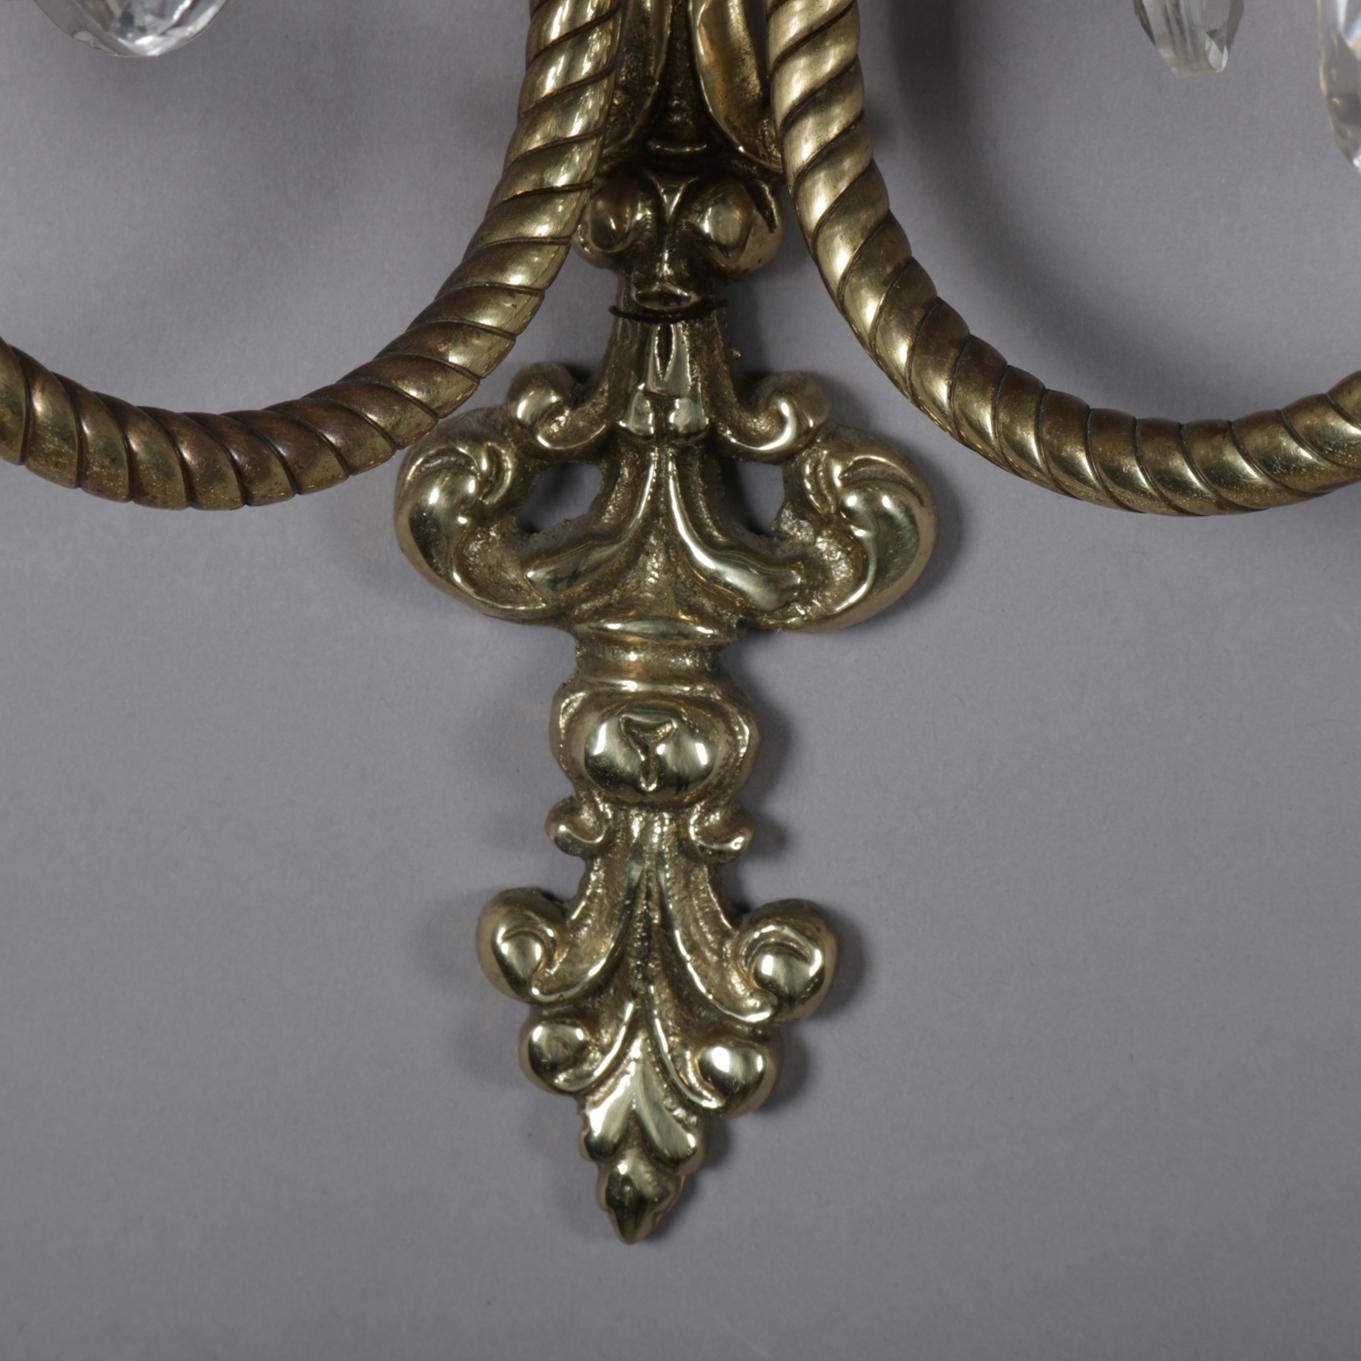 20th Century French Neoclassical Urn & Rope Twist Double Candle & Mirrored Wall Sconces, Pair